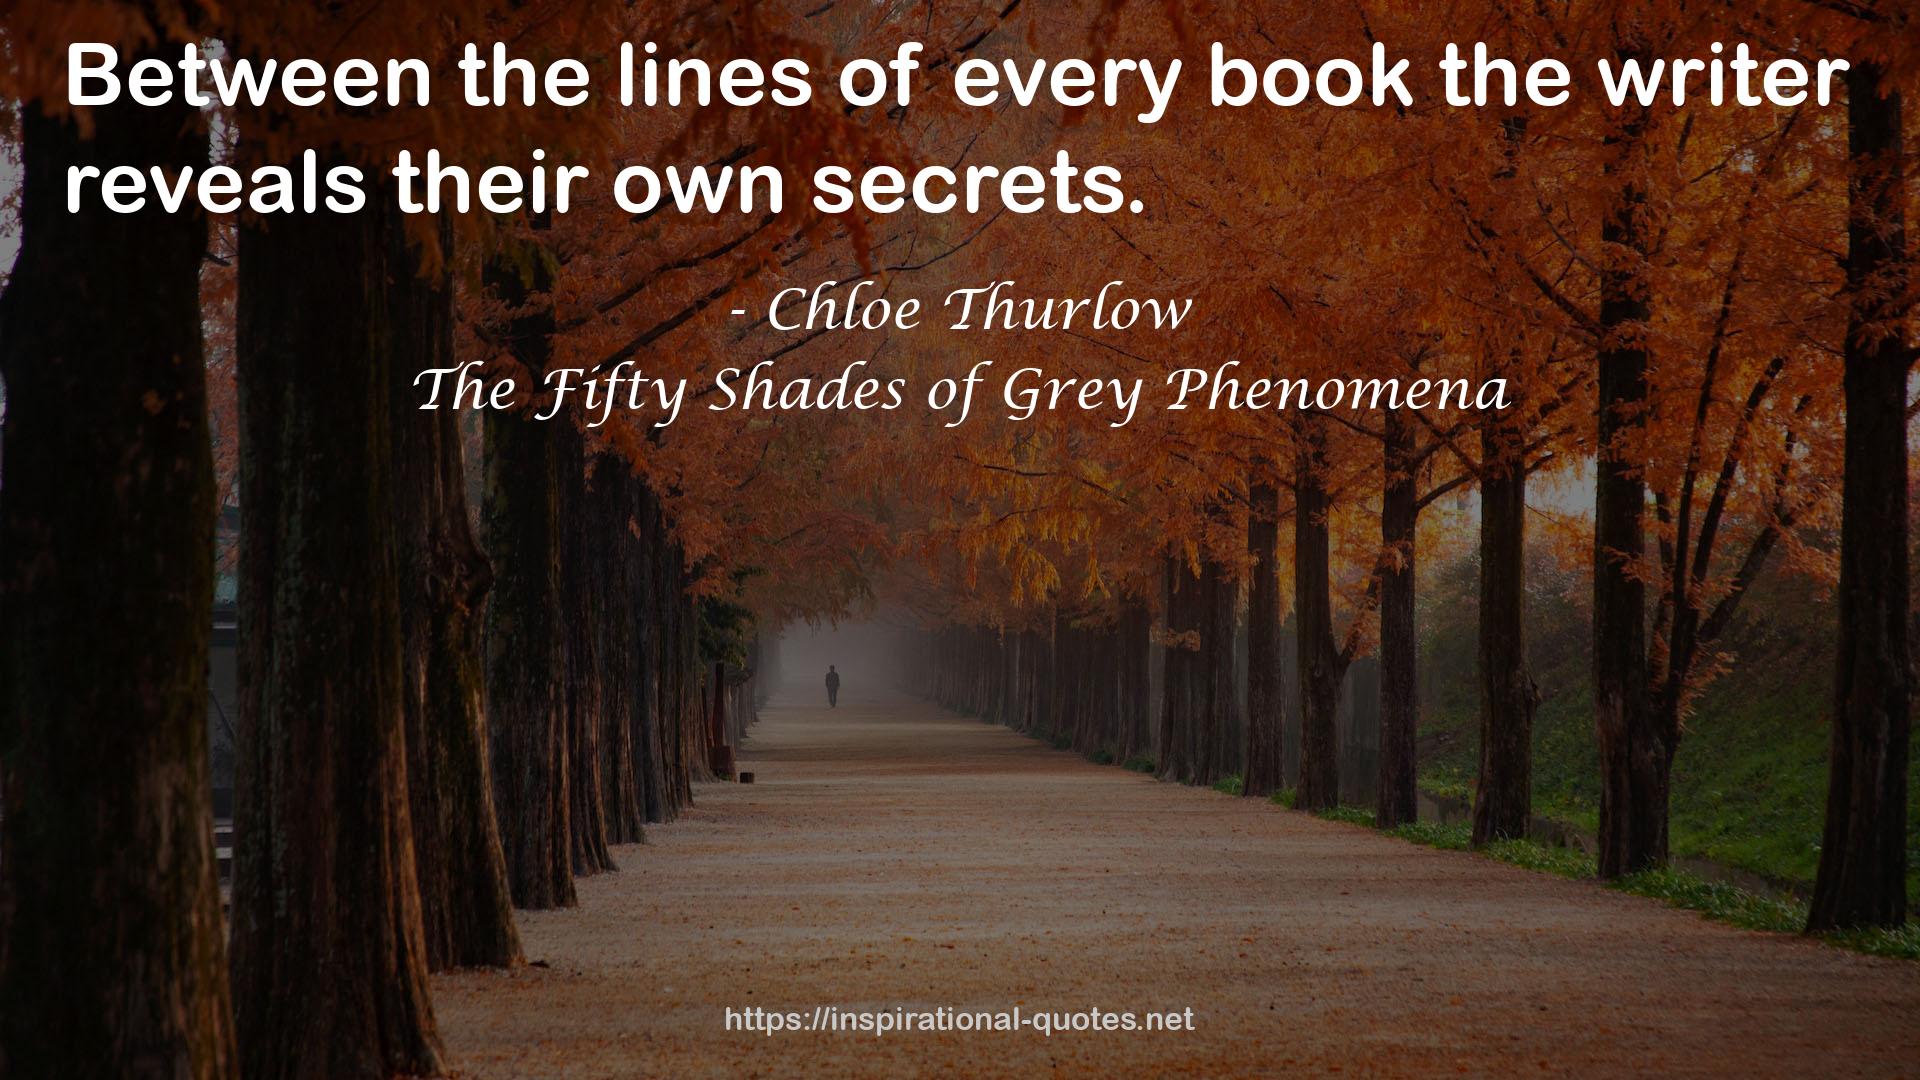 The Fifty Shades of Grey Phenomena QUOTES